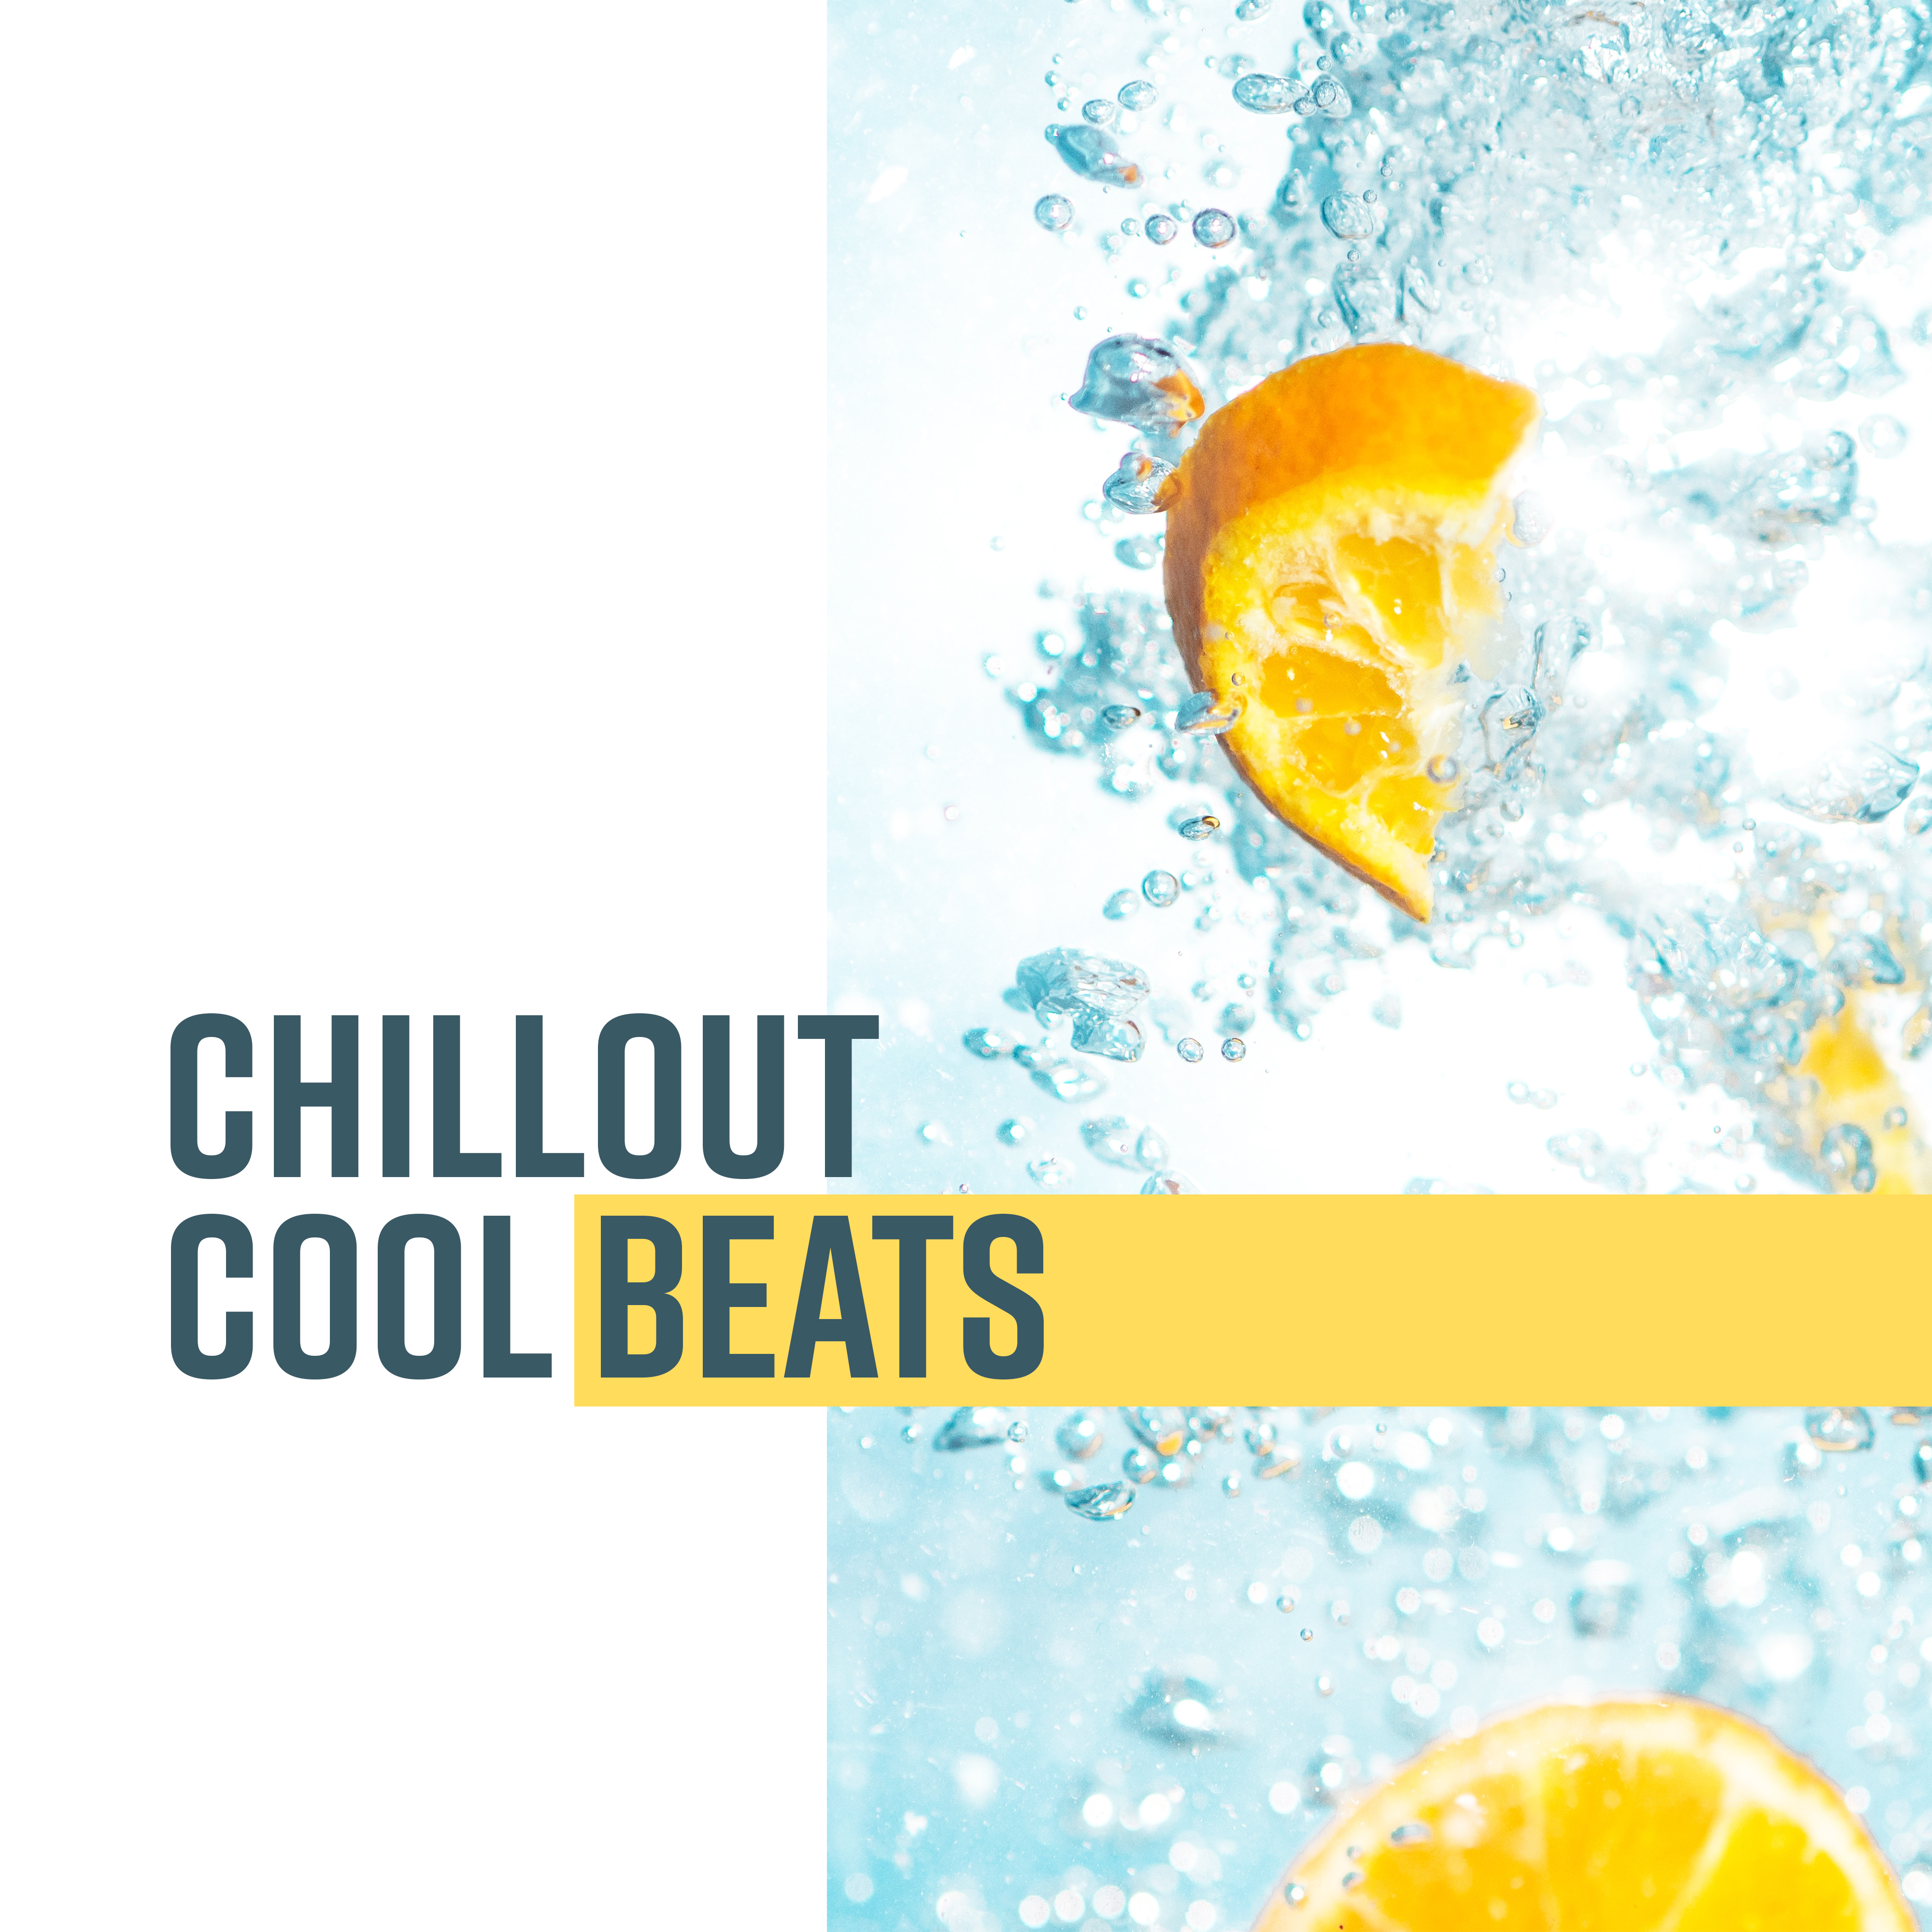 Chillout Cool Beats